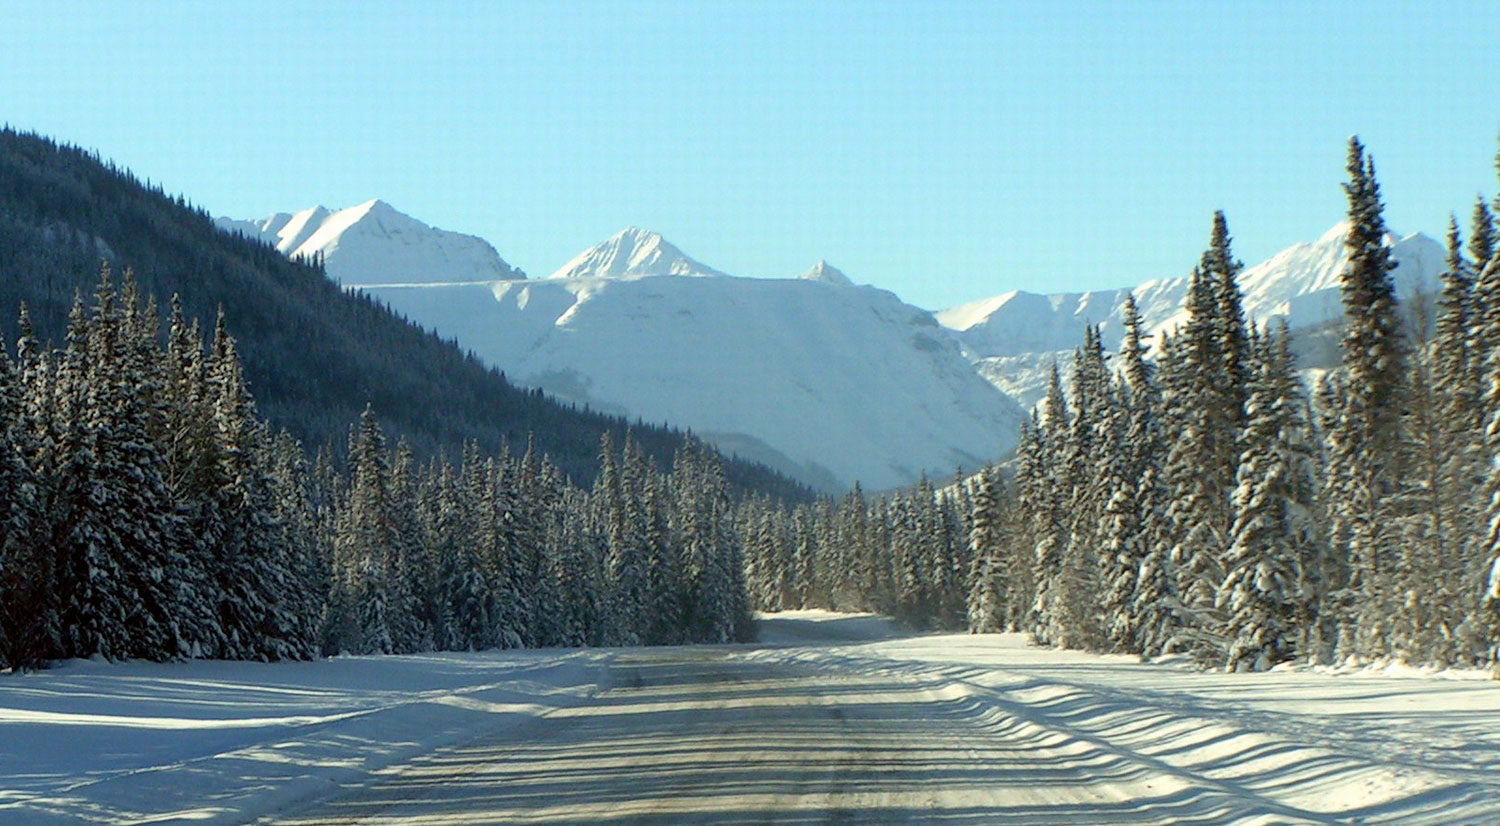 Alaska Highway (Alcan Highway): completion is celebrated (however, the highway is not usable by general vehicles until 1943)